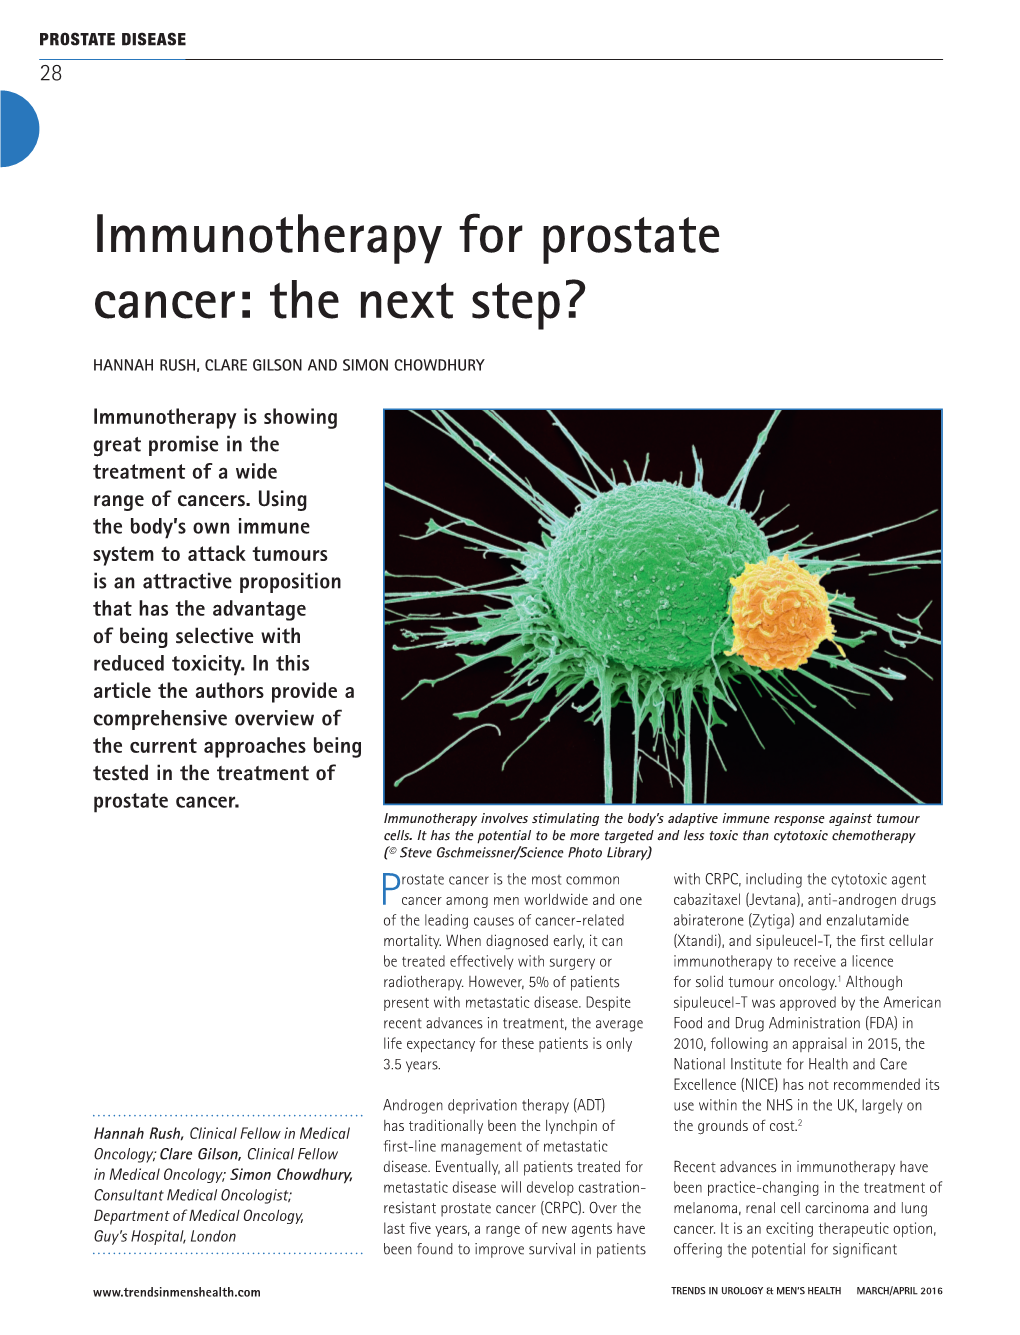 Immunotherapy for Prostate Cancer: the Next Step?